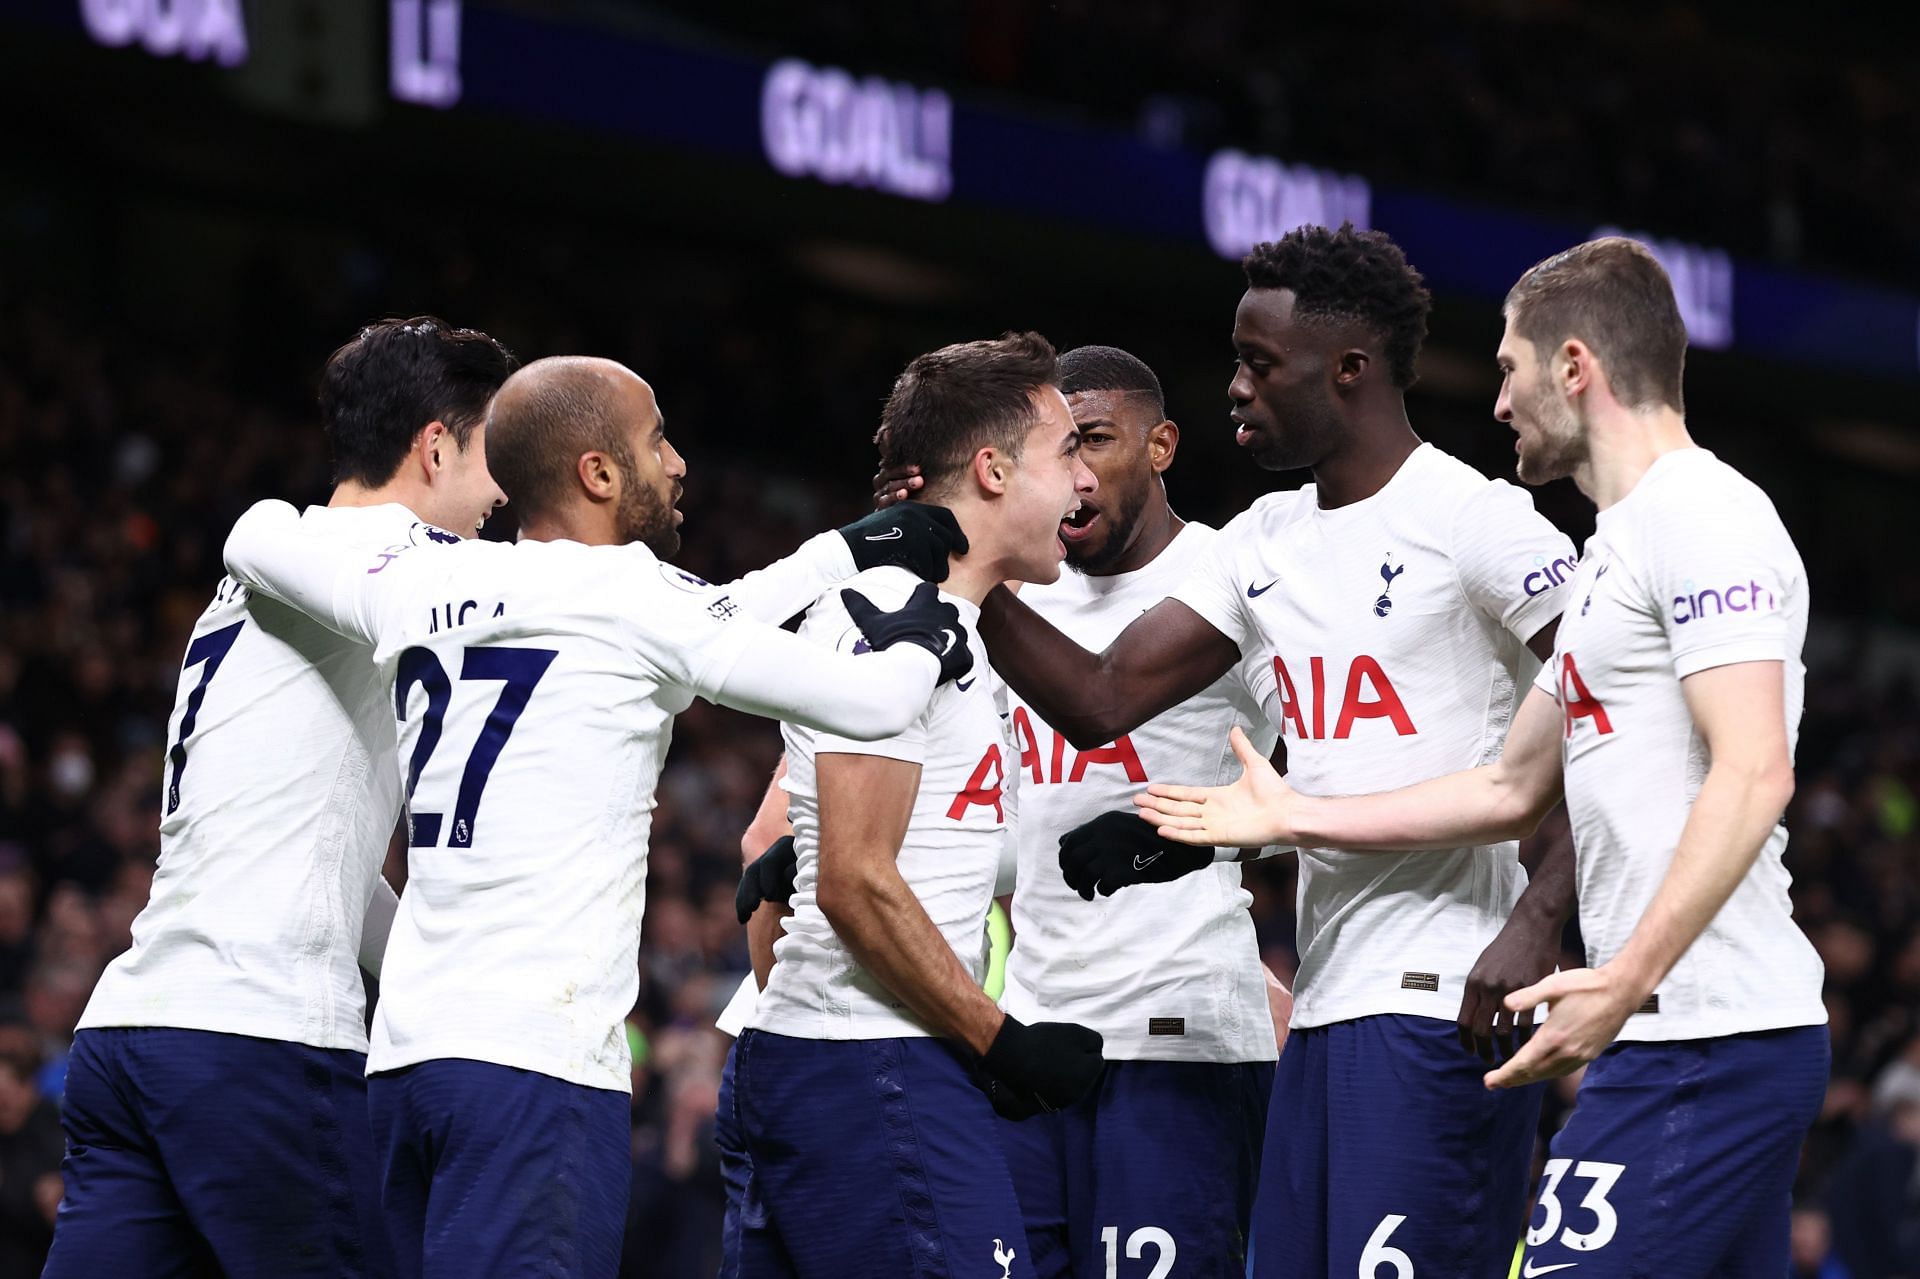 Tottenham are looking to get back on track